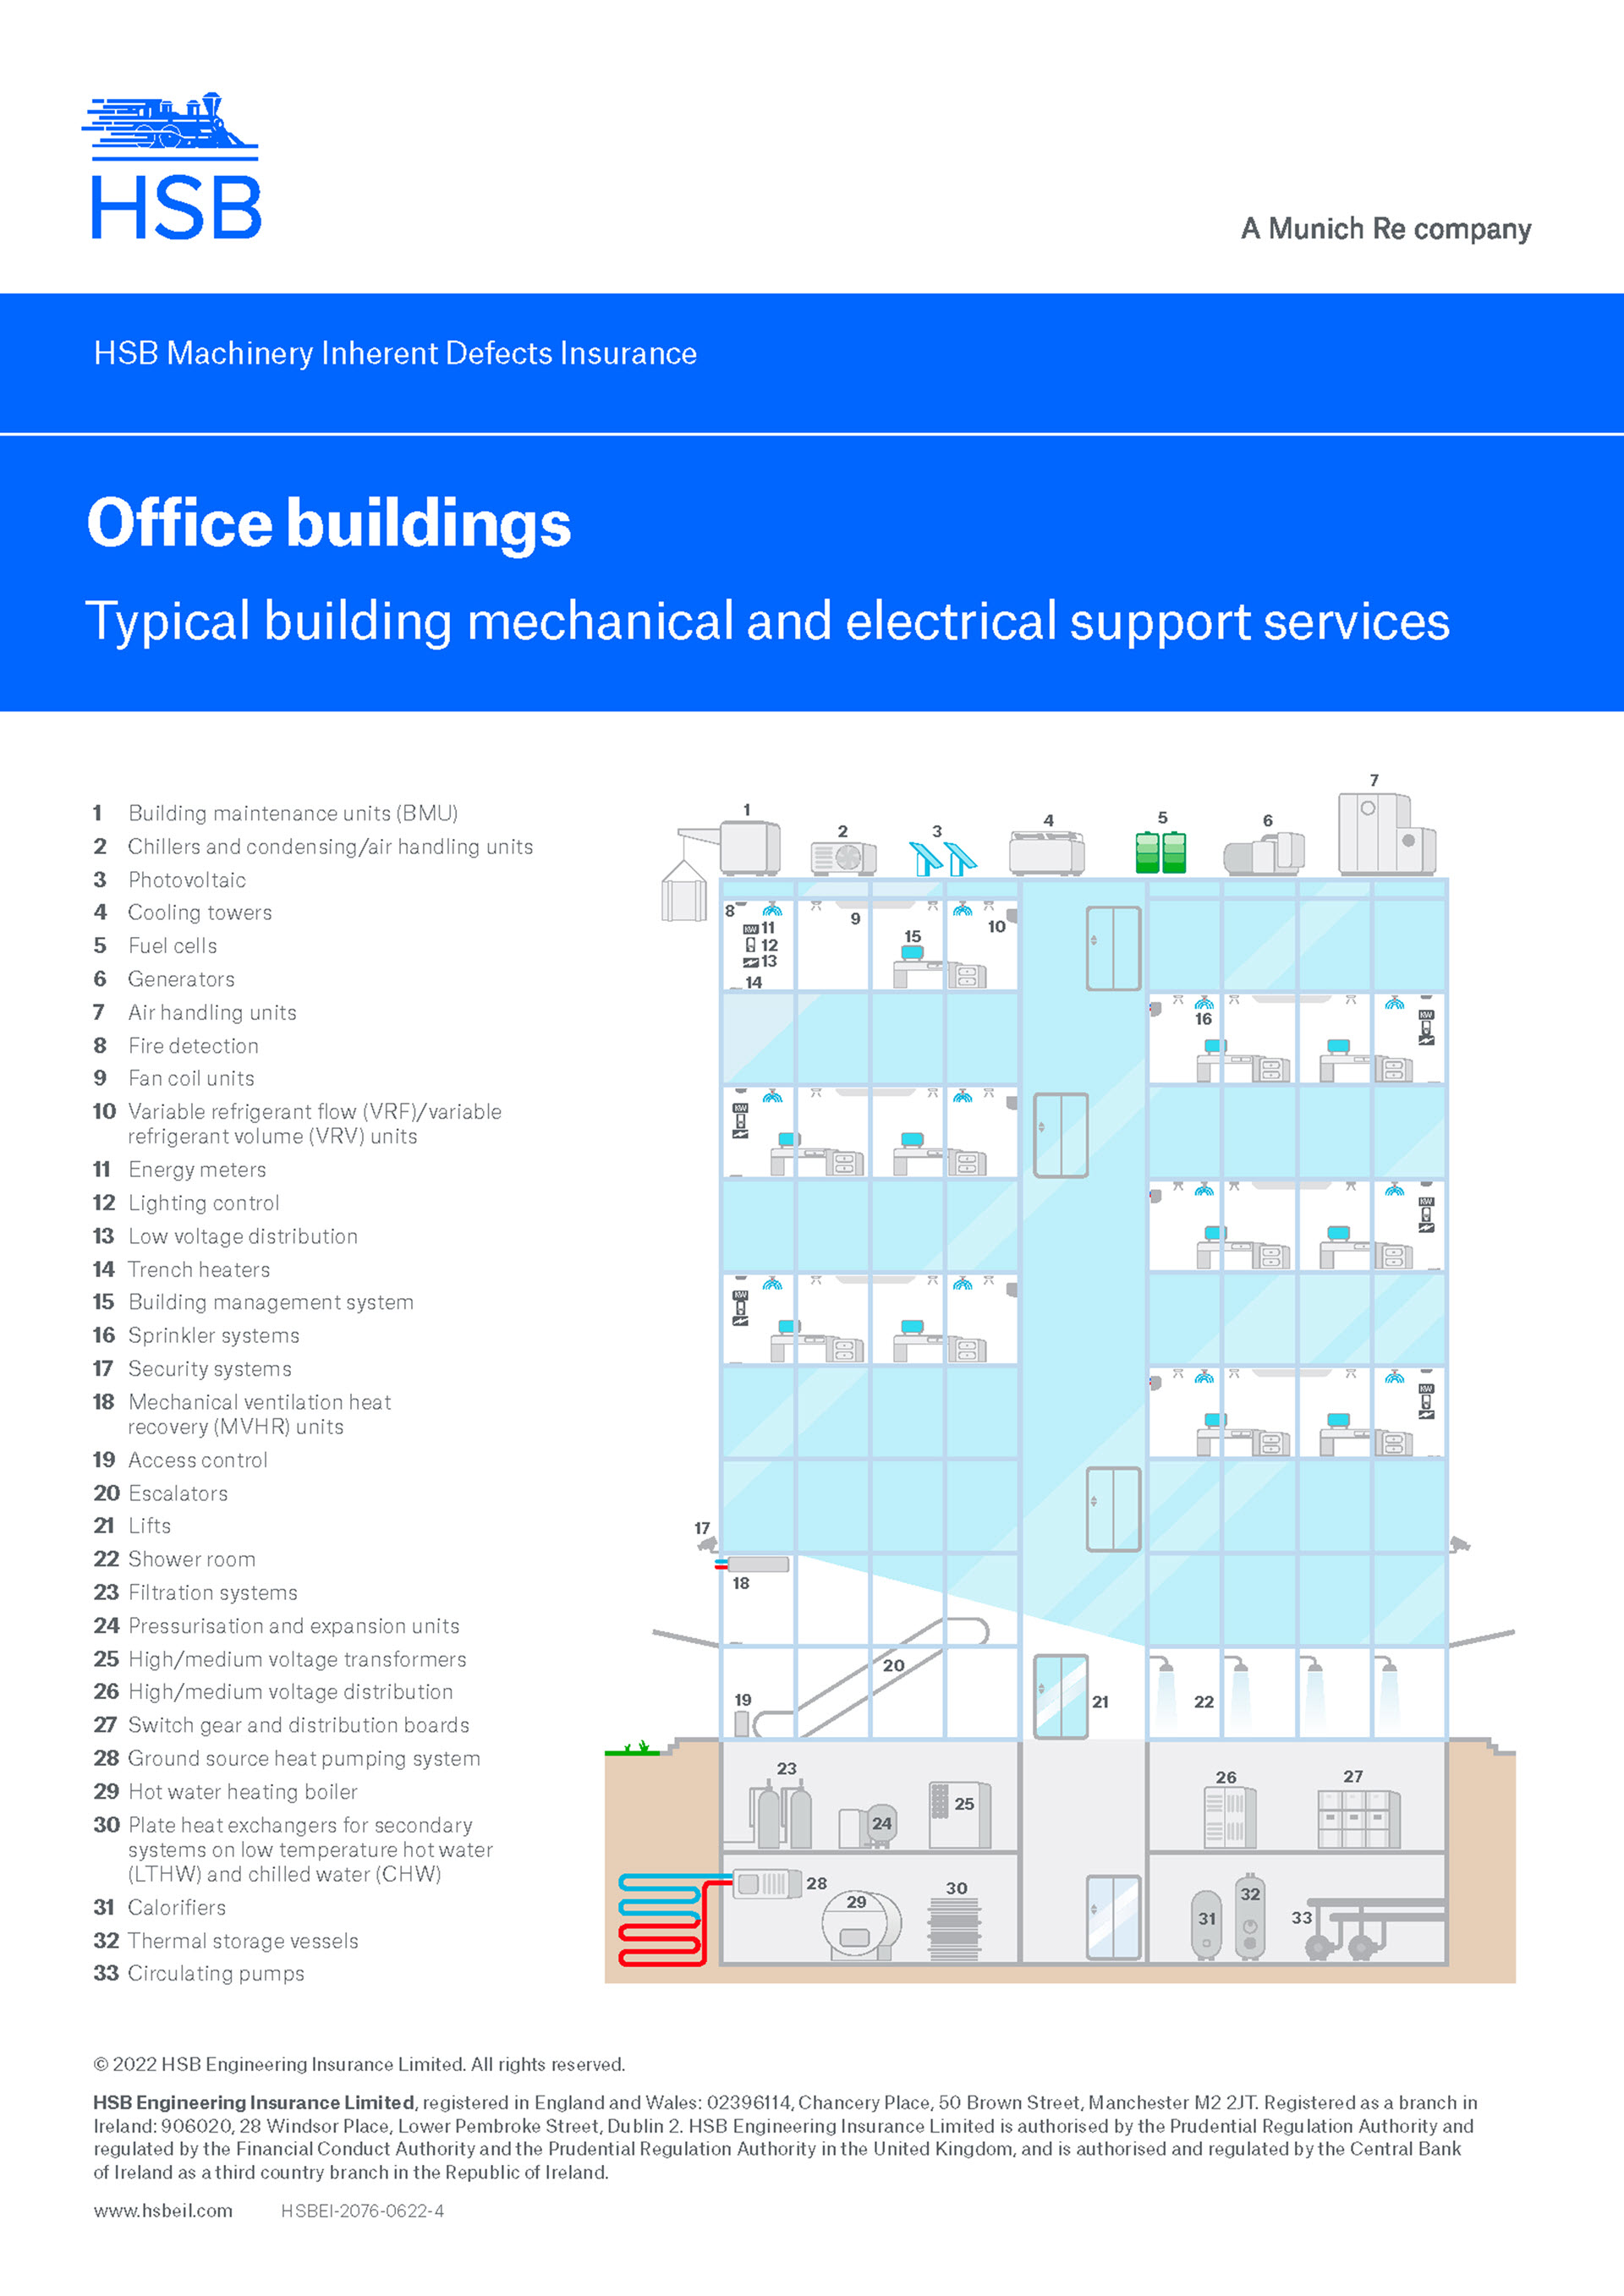 Building mechanical and electrical support services